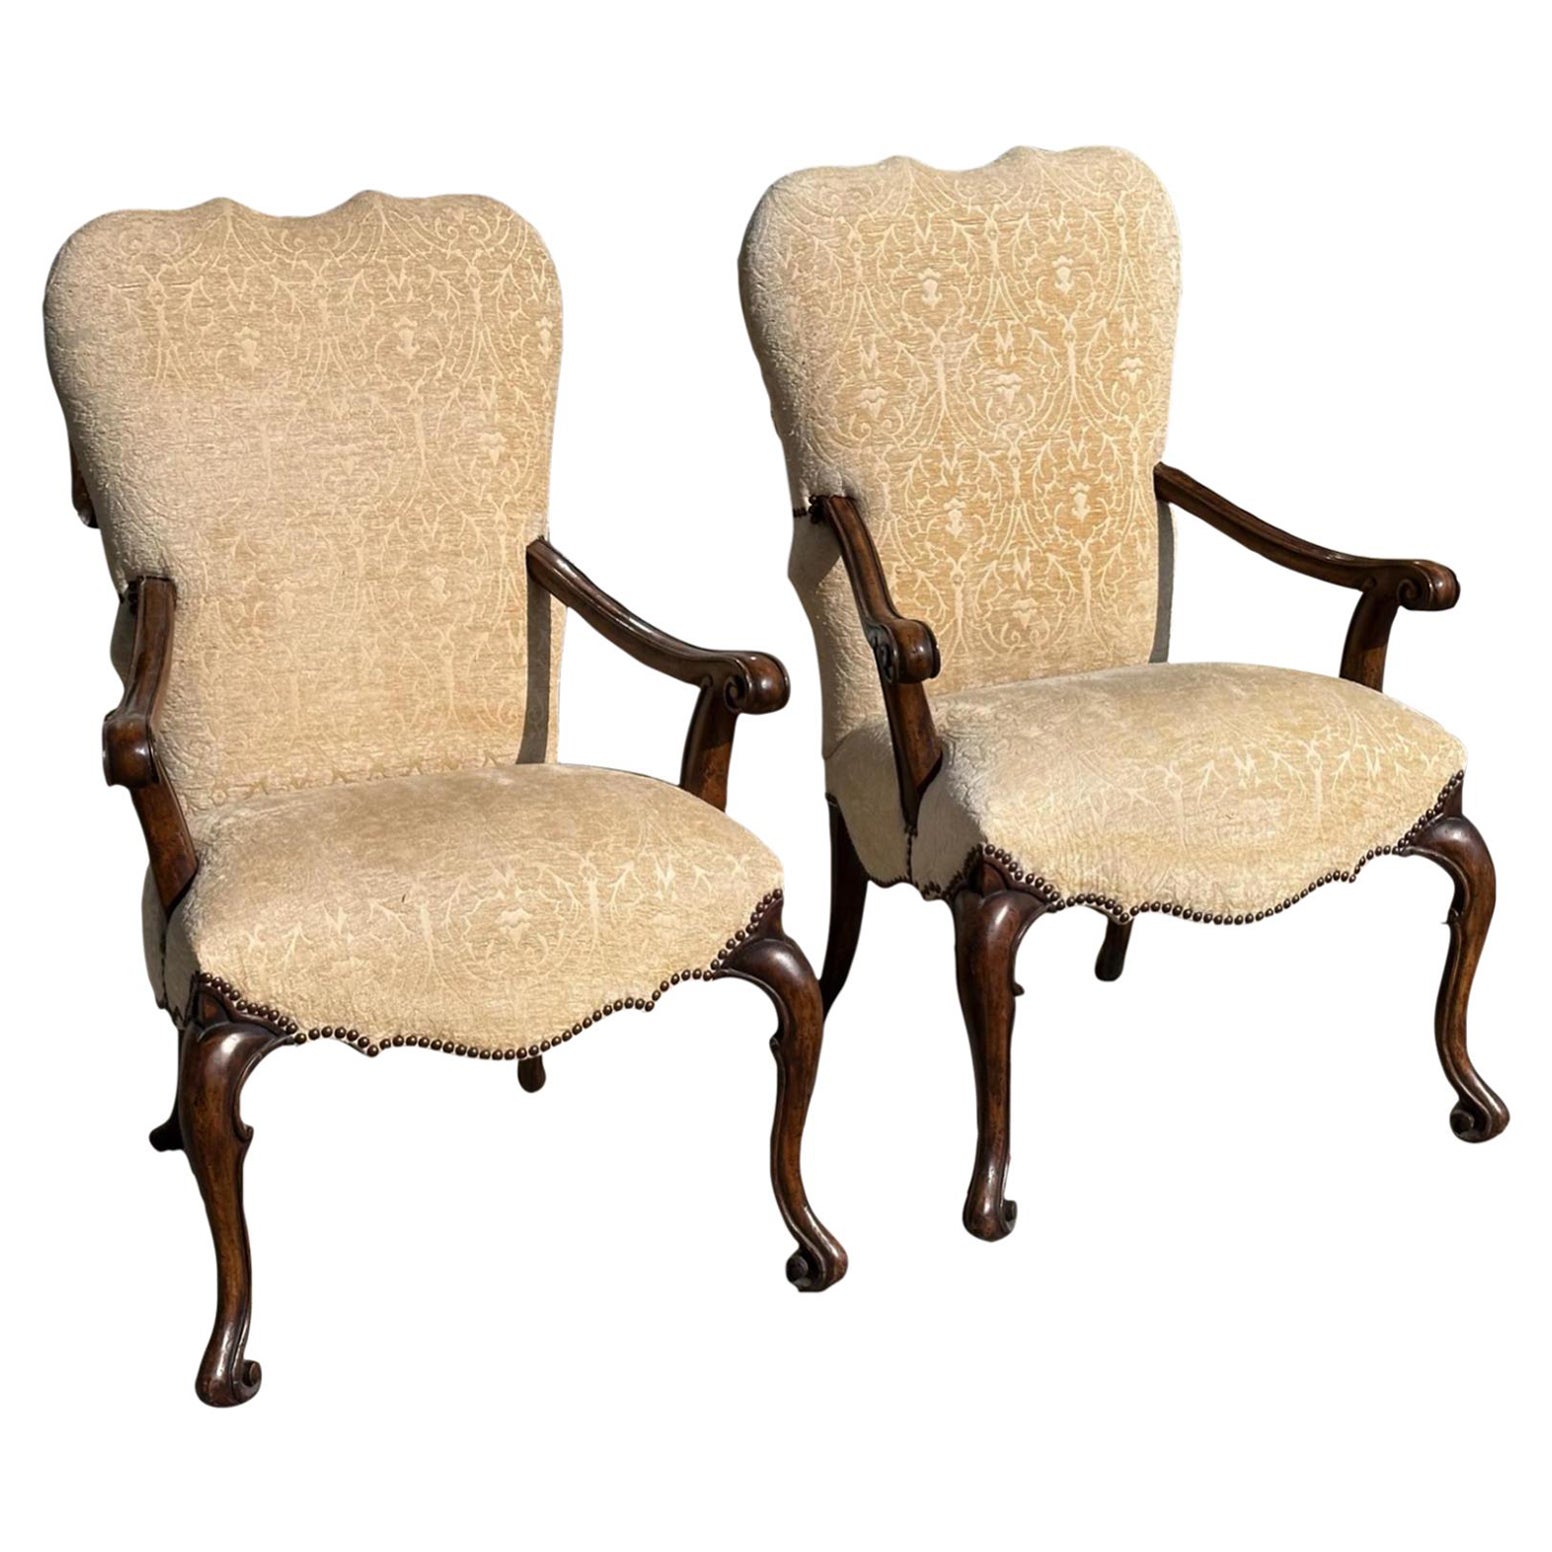 Pair of Therien Studio Workshops for Dessin Fournir Volute Arm Chairs